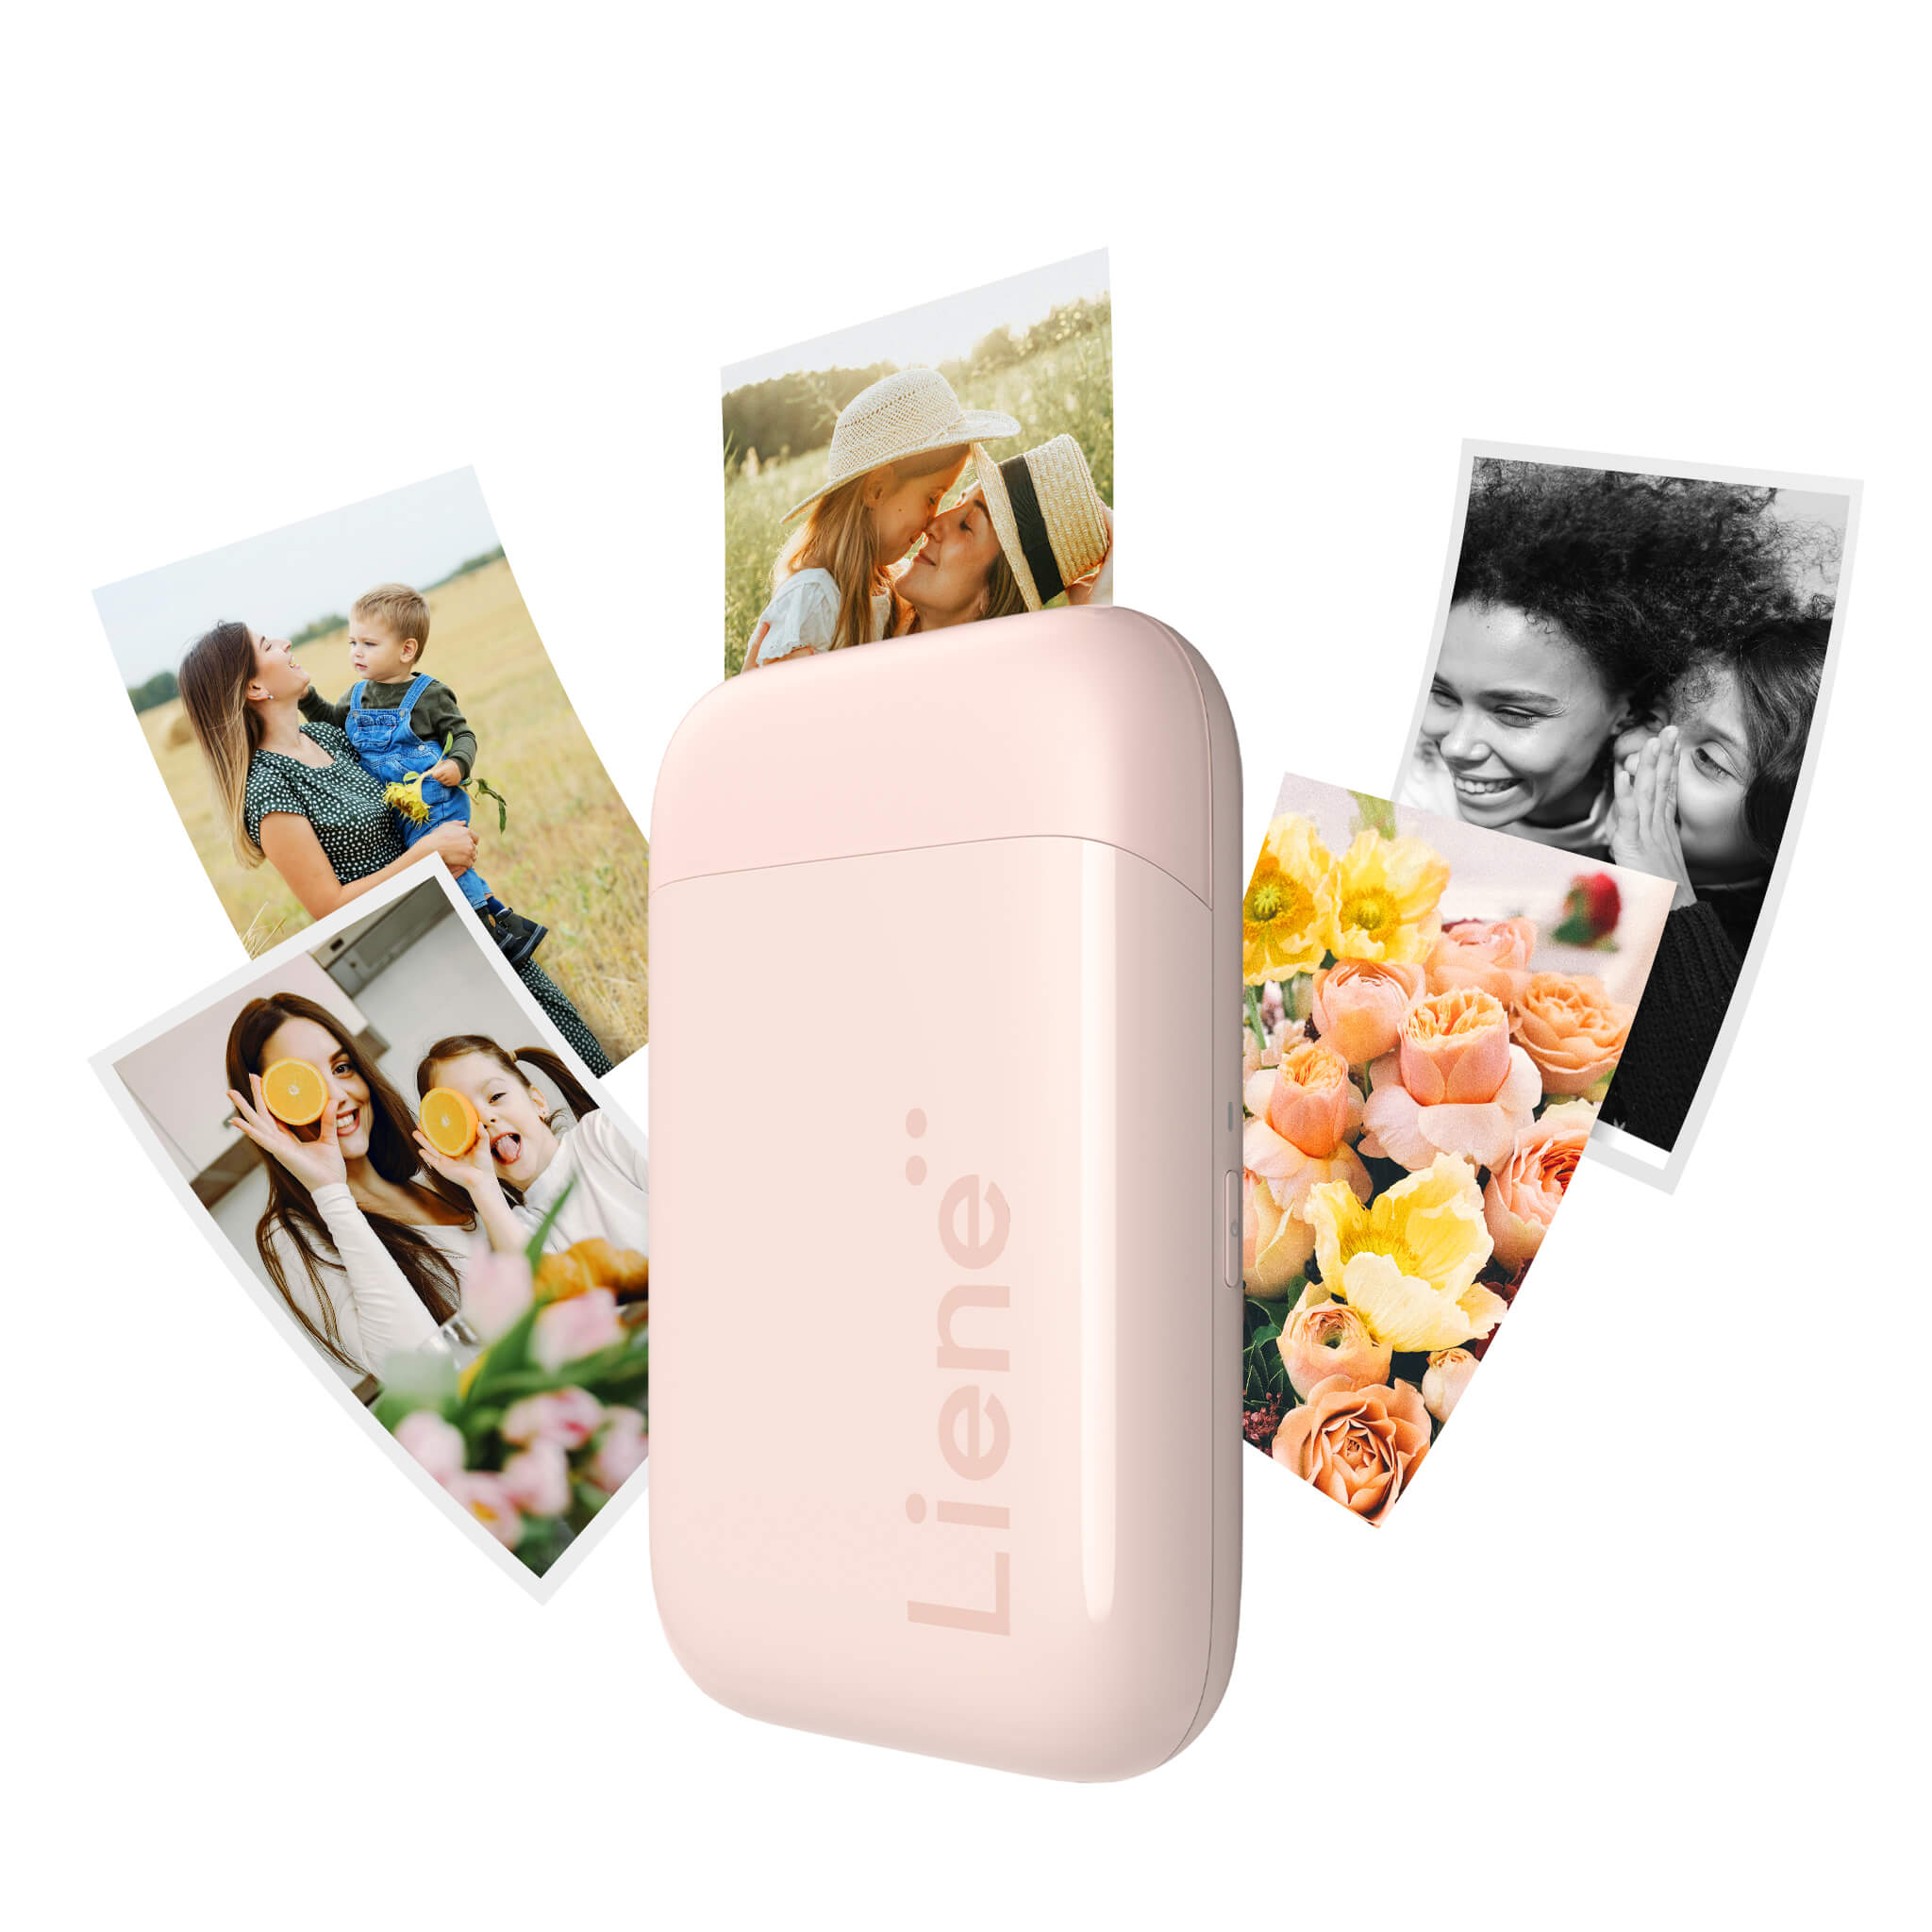 Liene Pearl K100 2x3" Portable Photo Printer - Pink (5 Zink Photo Papers)